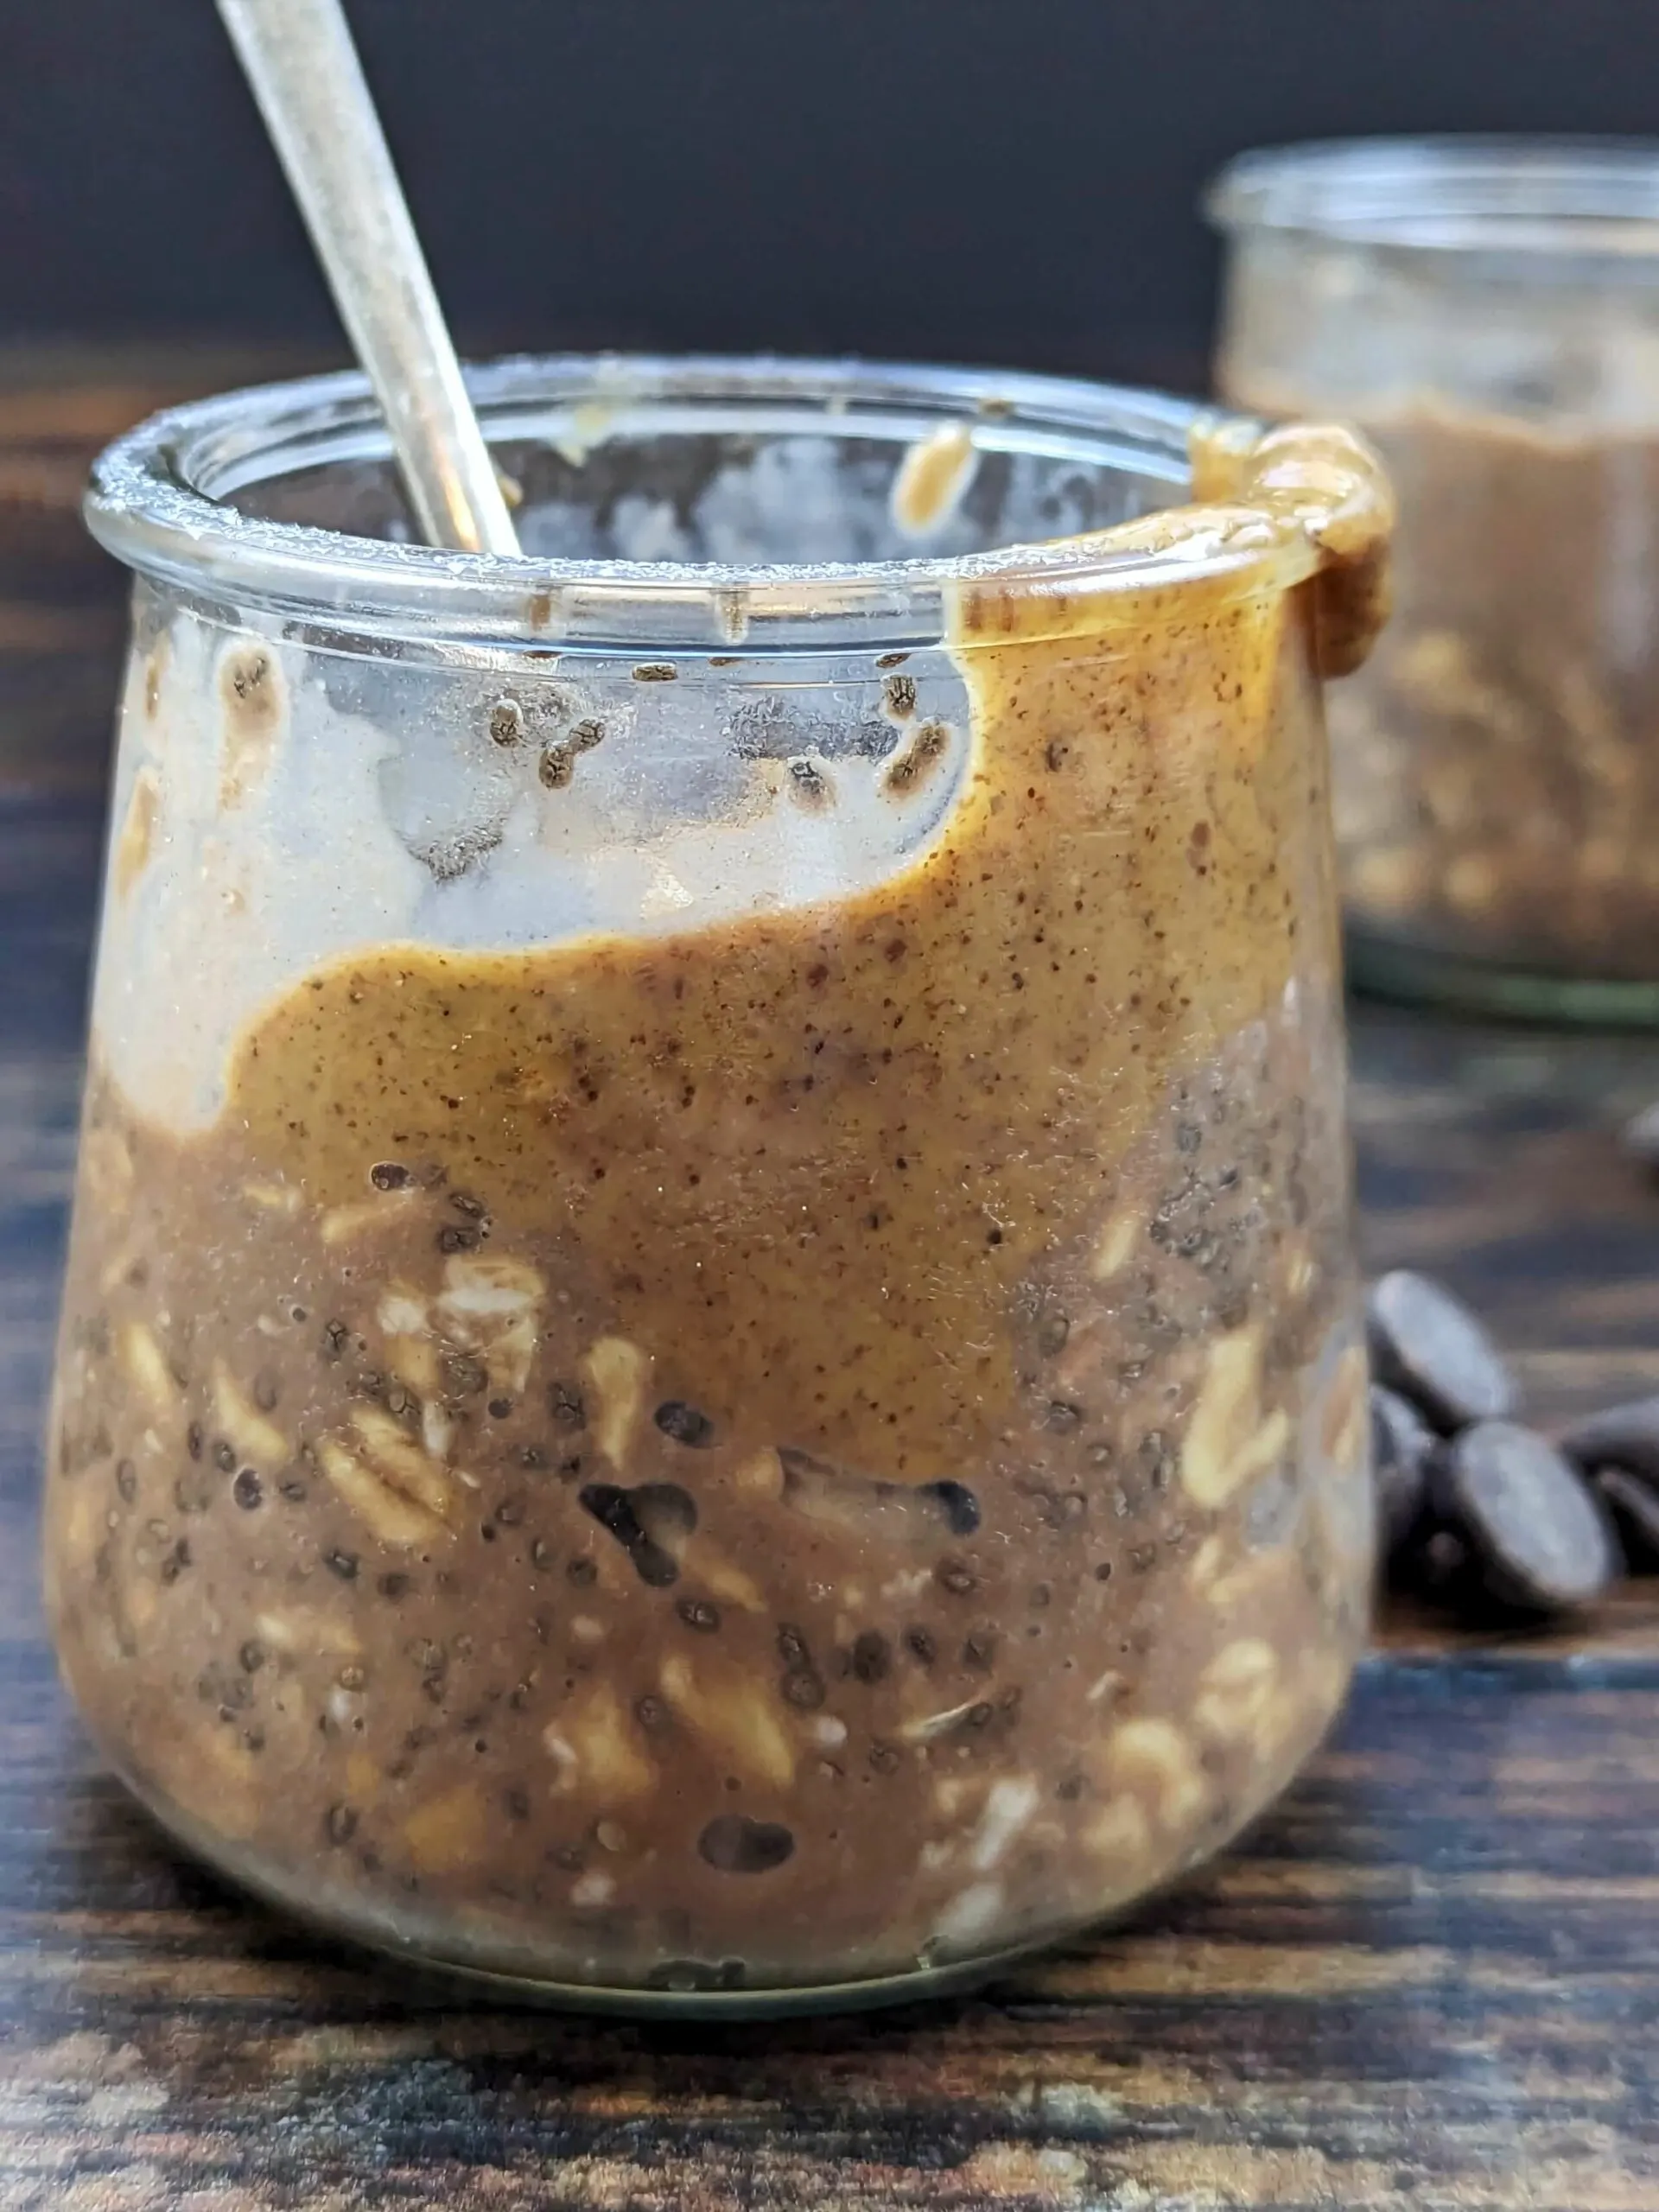 Two jars of high protein oatmeal with peanut butter and chocolate.